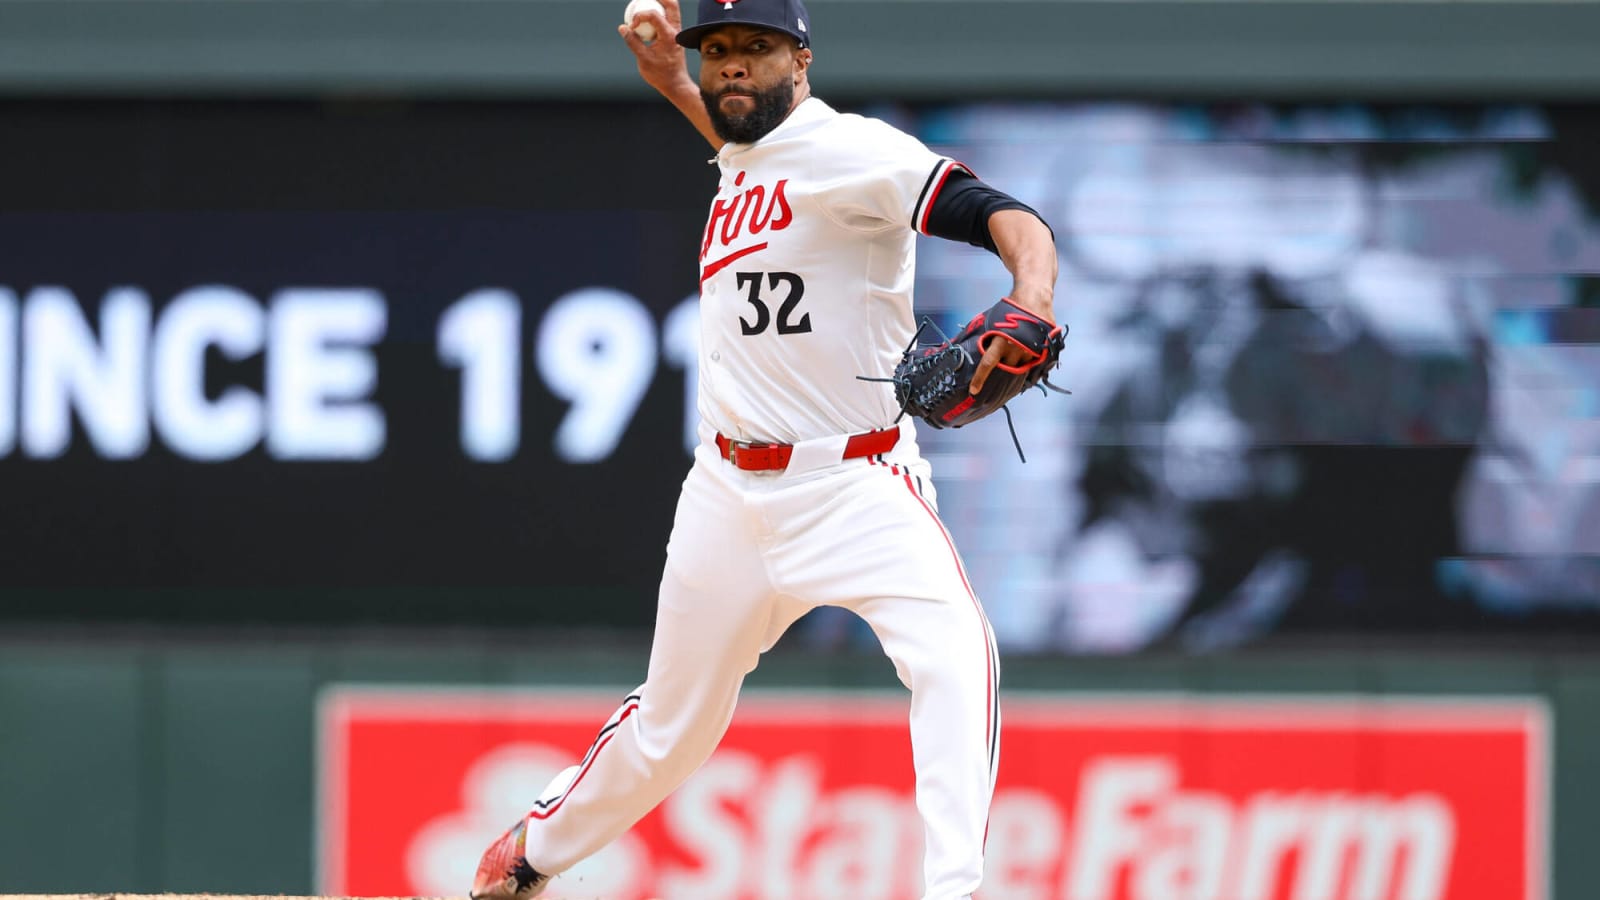 Jay Jackson is available again after being designated for assignment by Twins